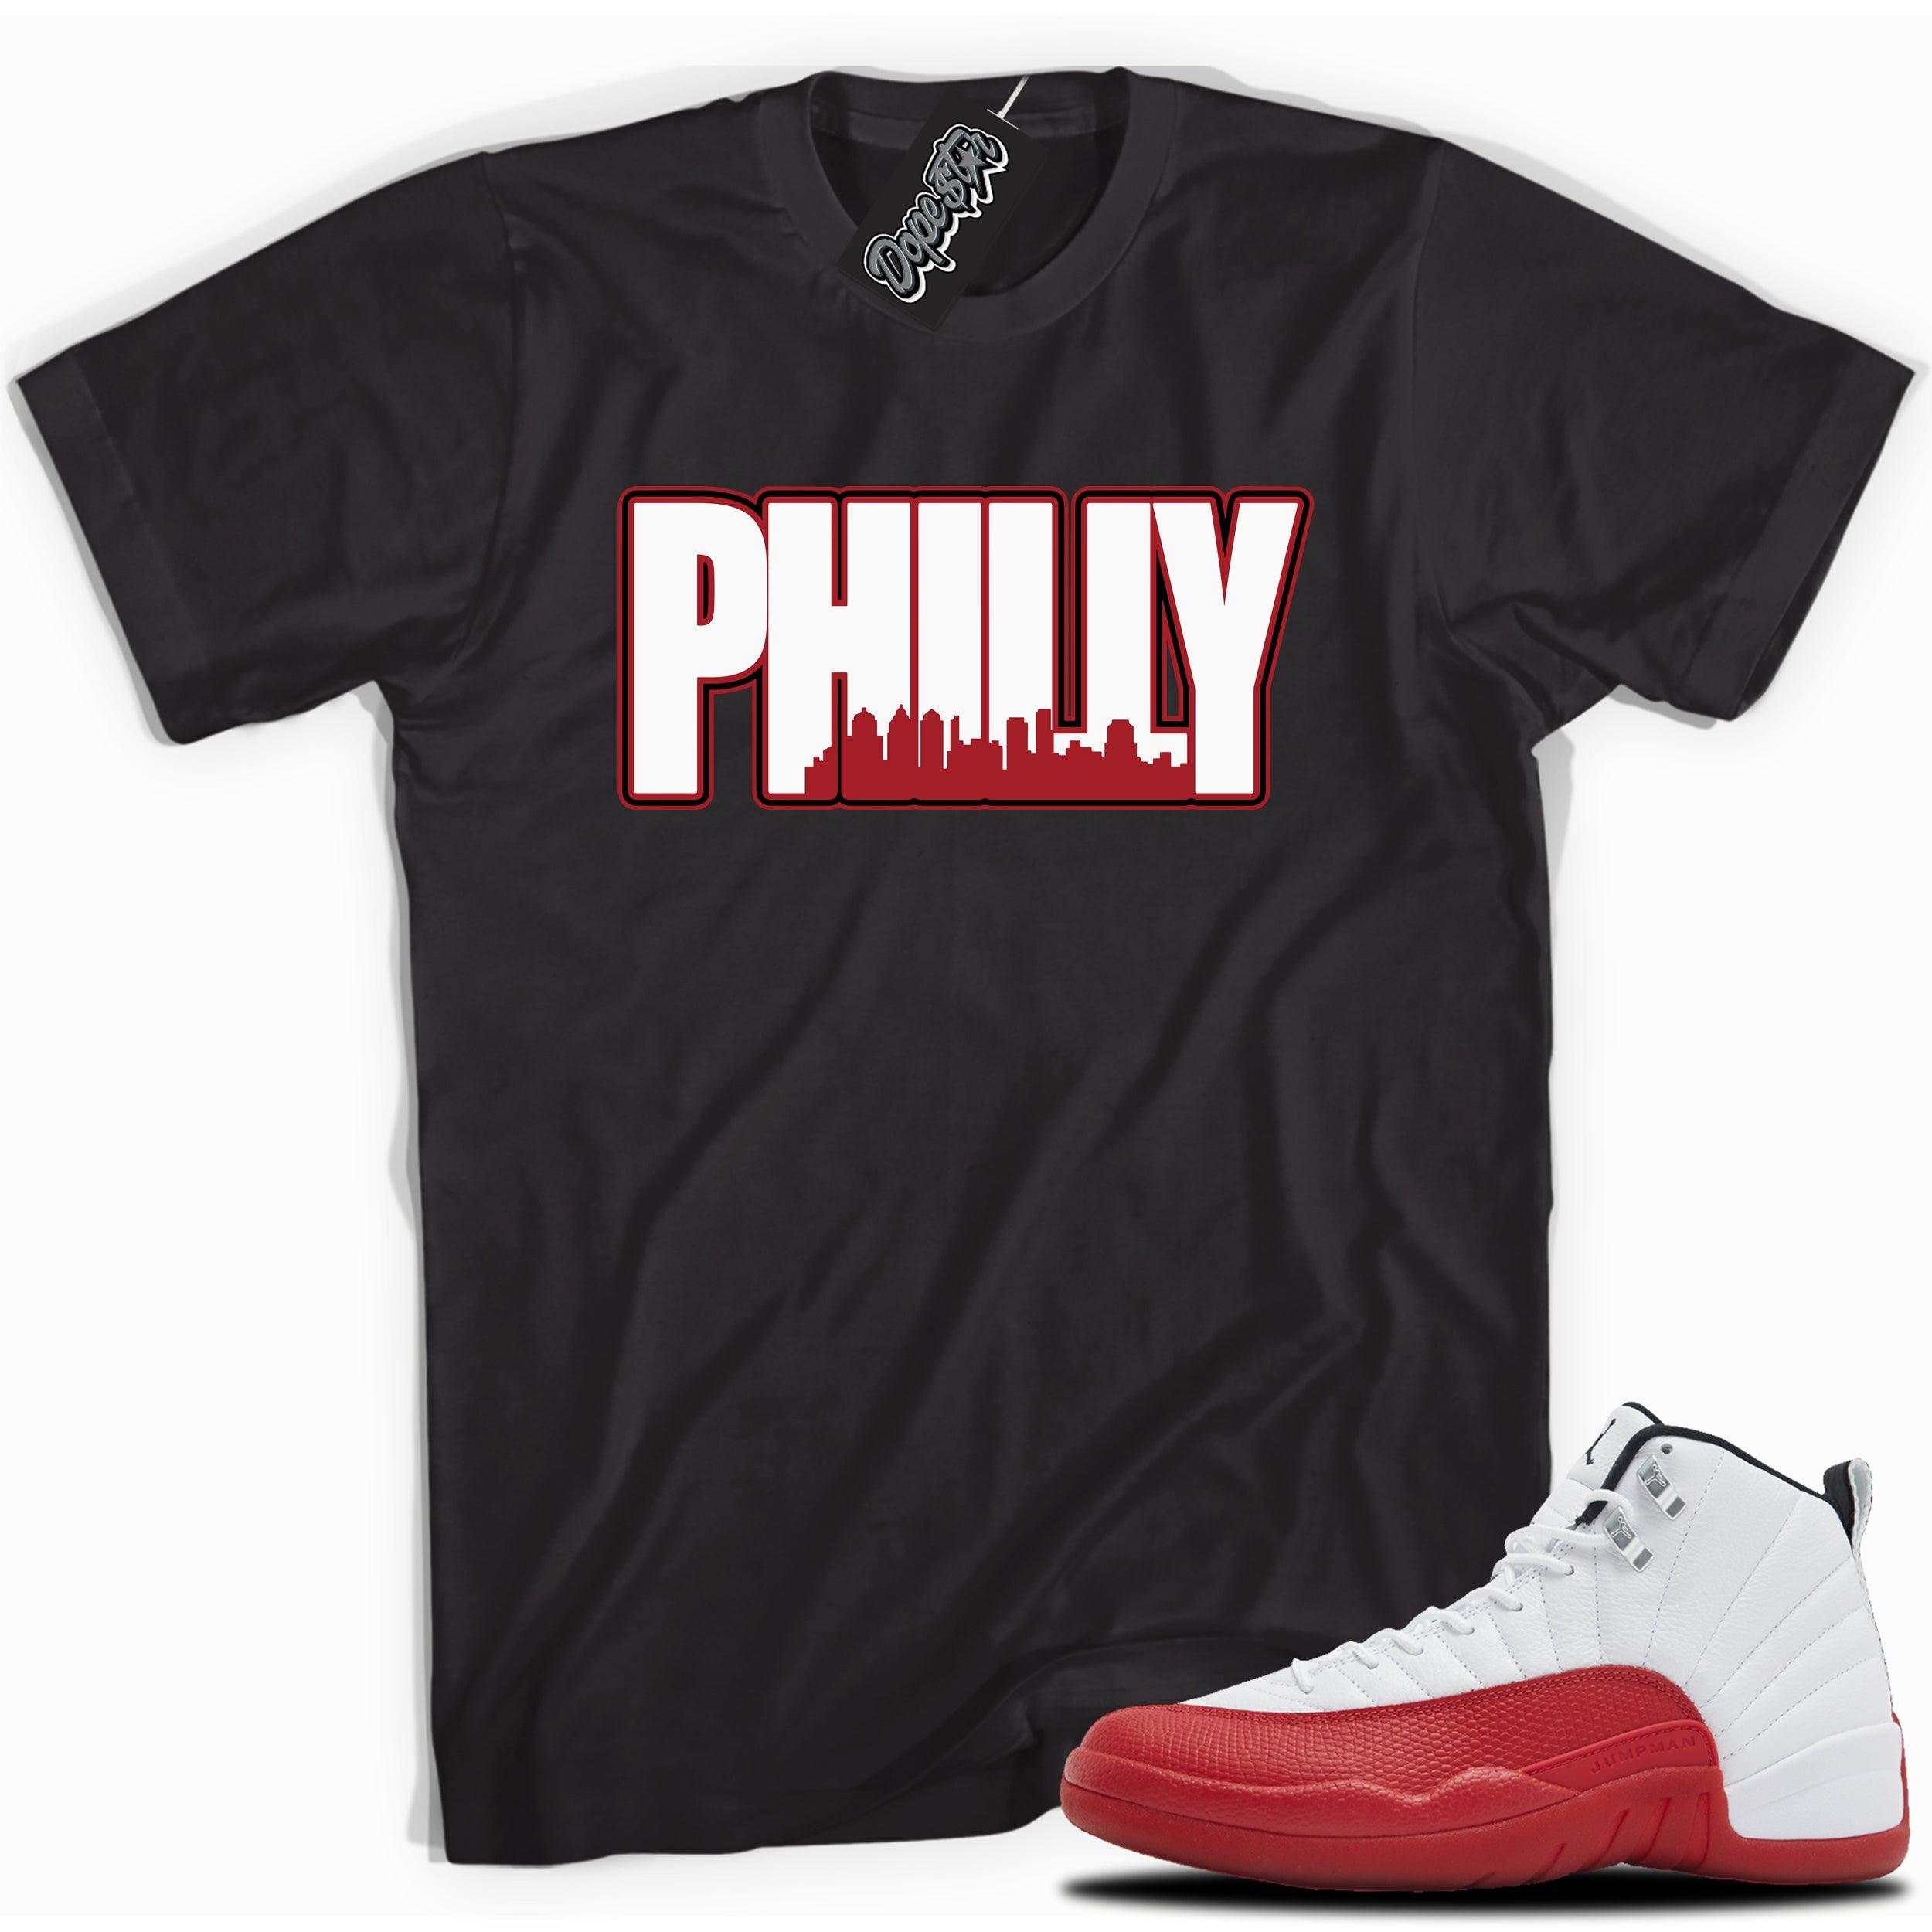 Cool Black graphic tee with “PHILLY” print, that perfectly matches Air Jordan 12 Retro Cherry Red 2023 red and white sneakers 